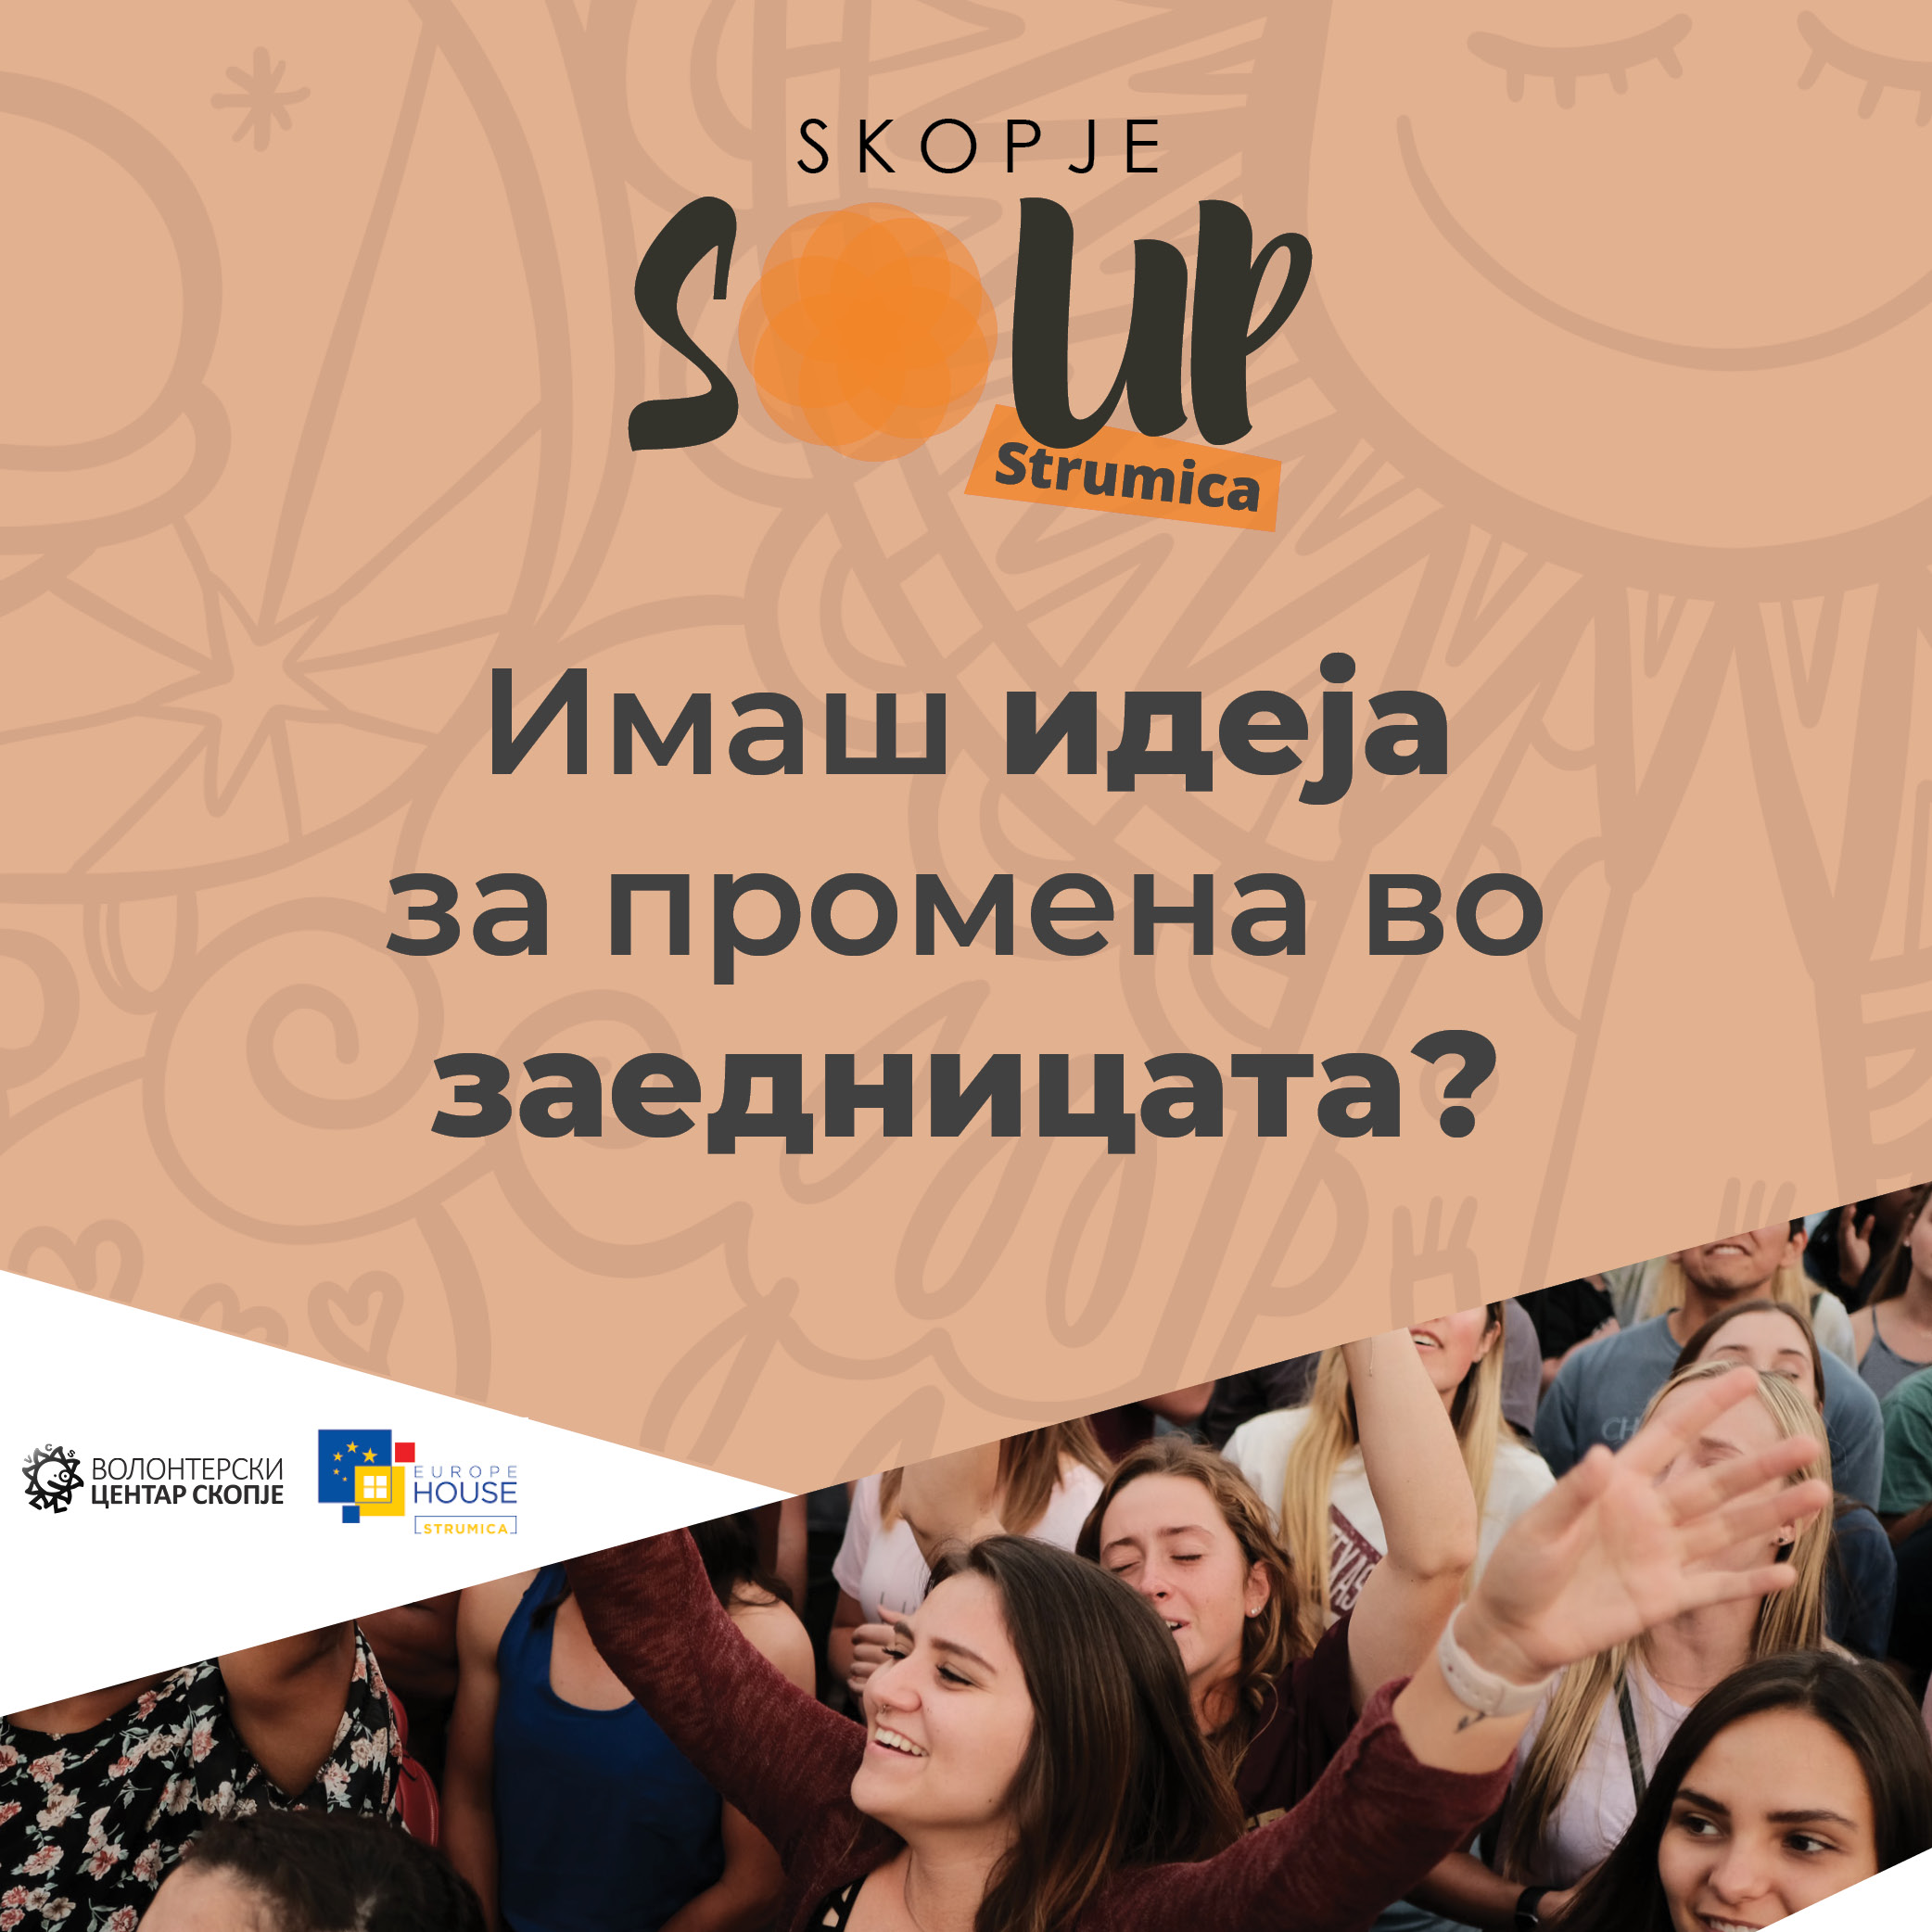 You are currently viewing Call for ideas on creating a better community | Skopje SOUP